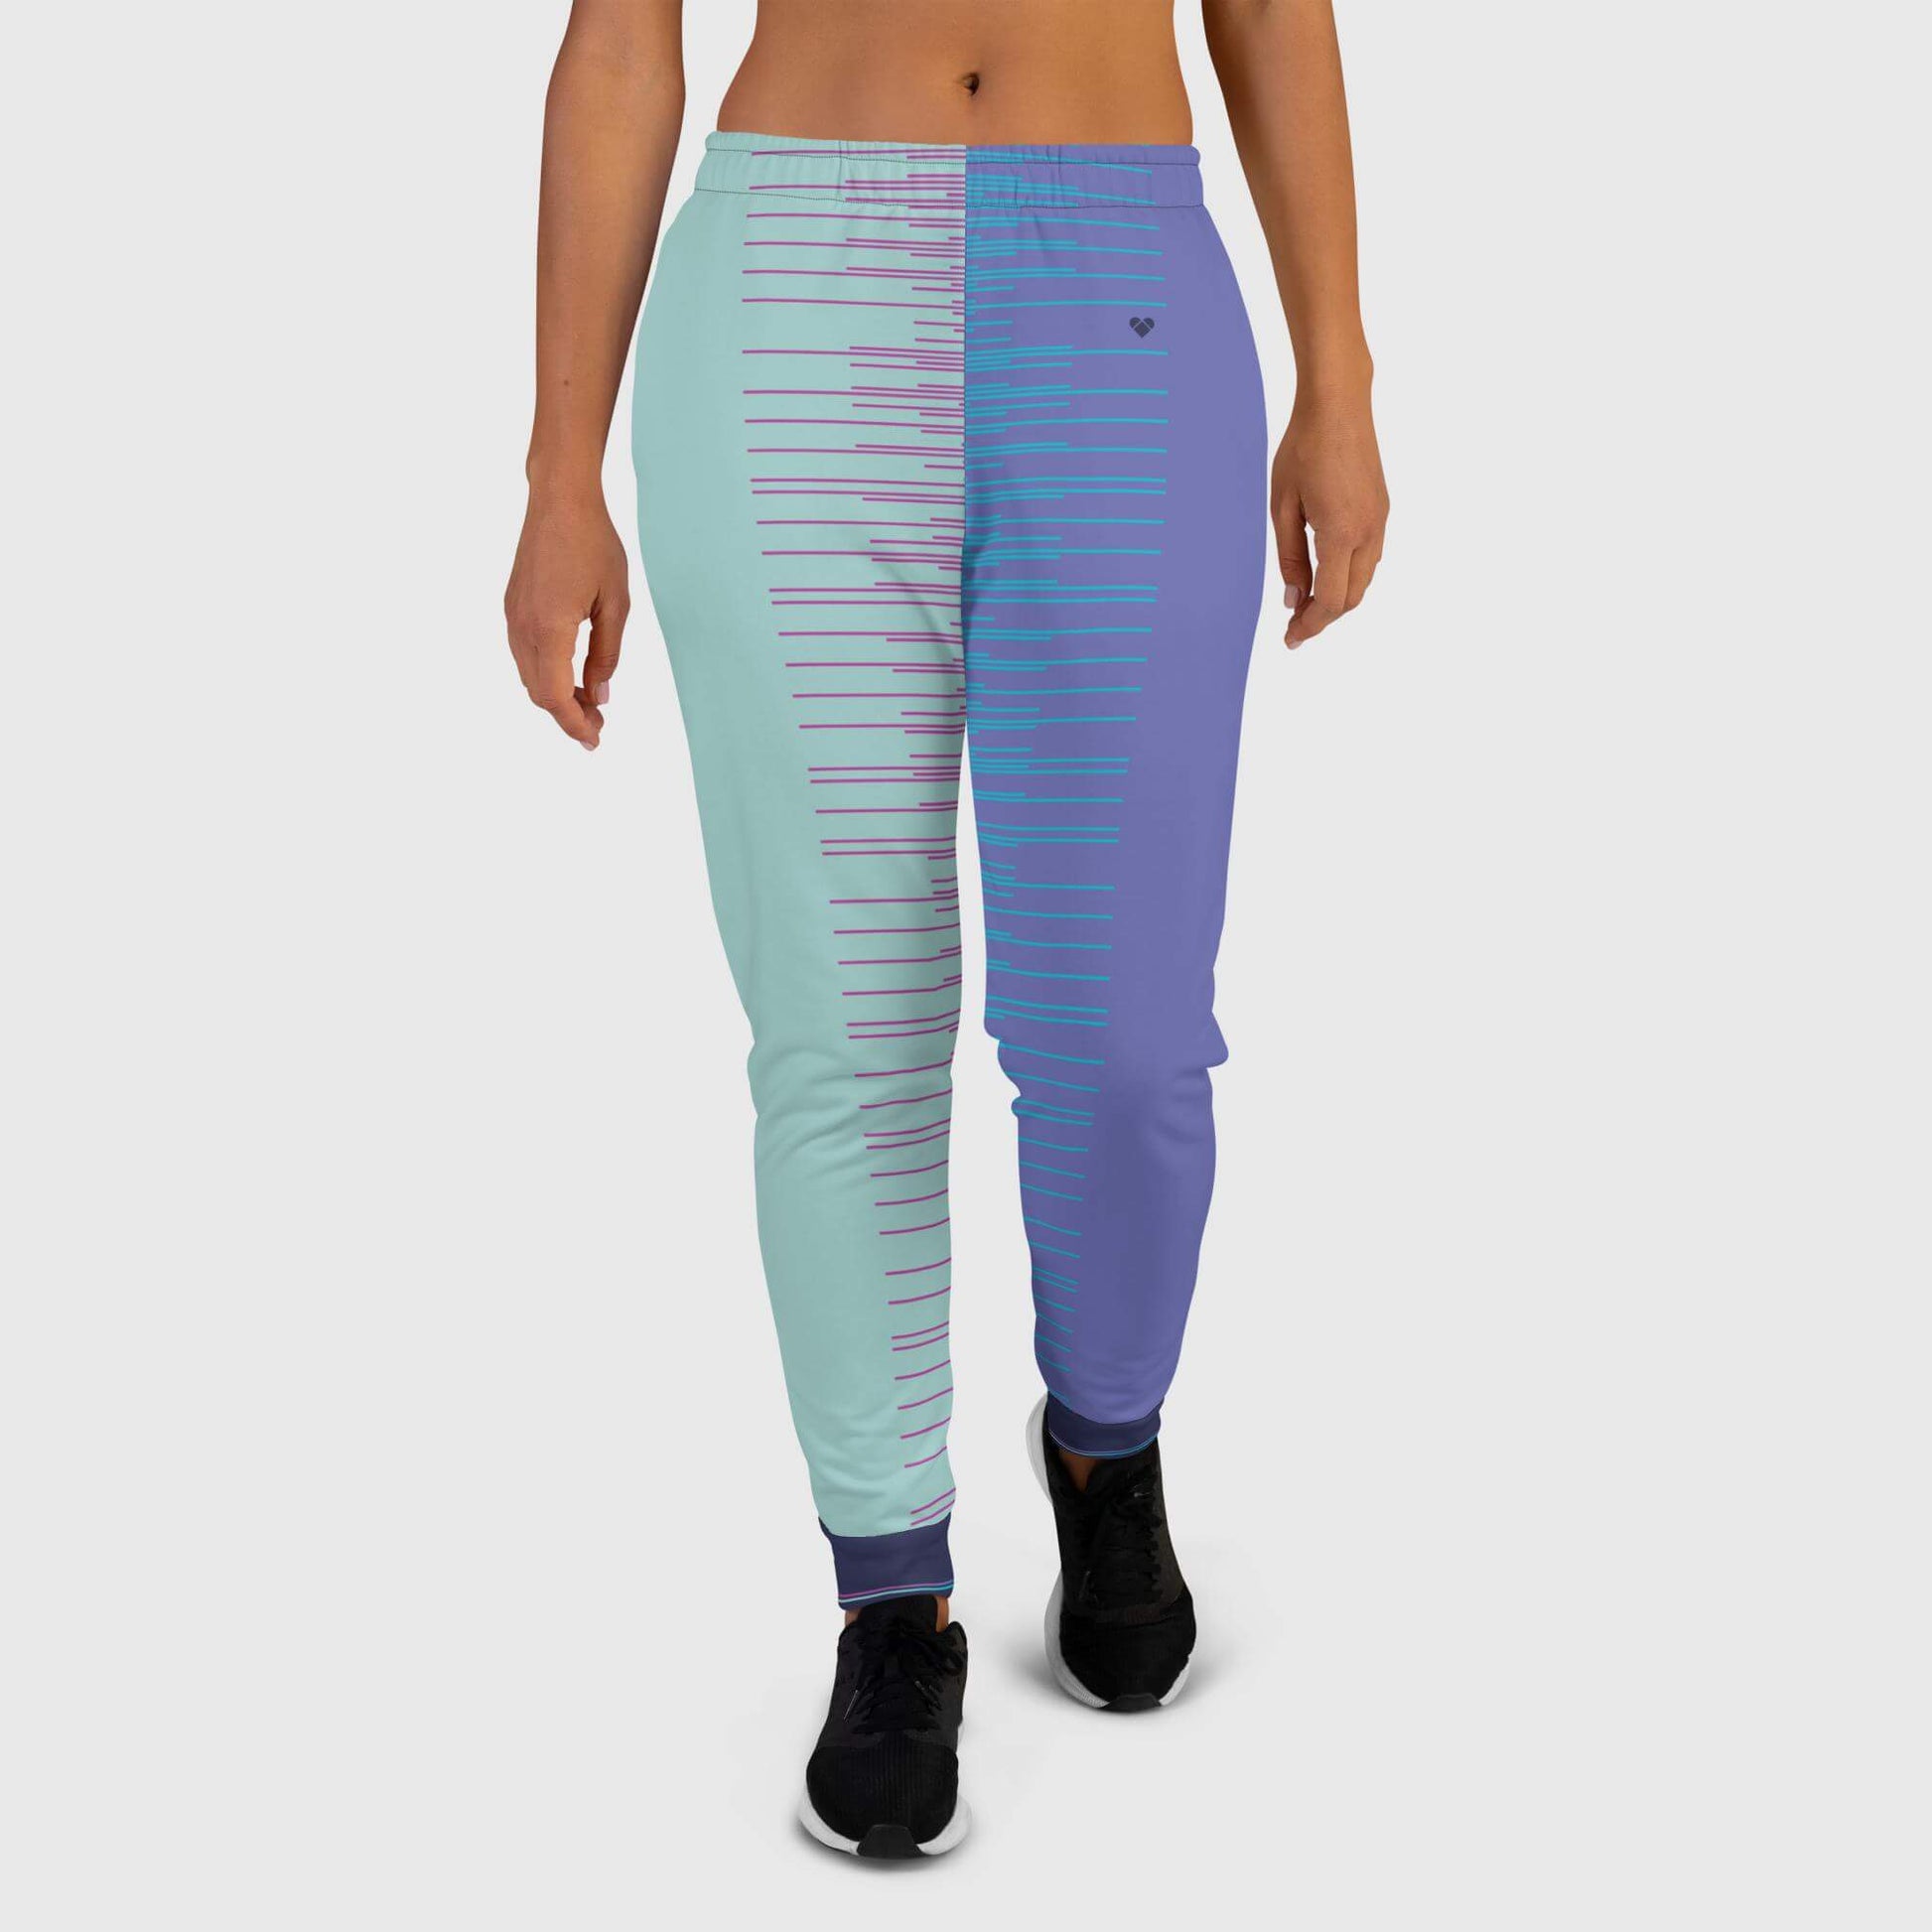 Mint & Periwinkle Joggers by CRiZ AMOR